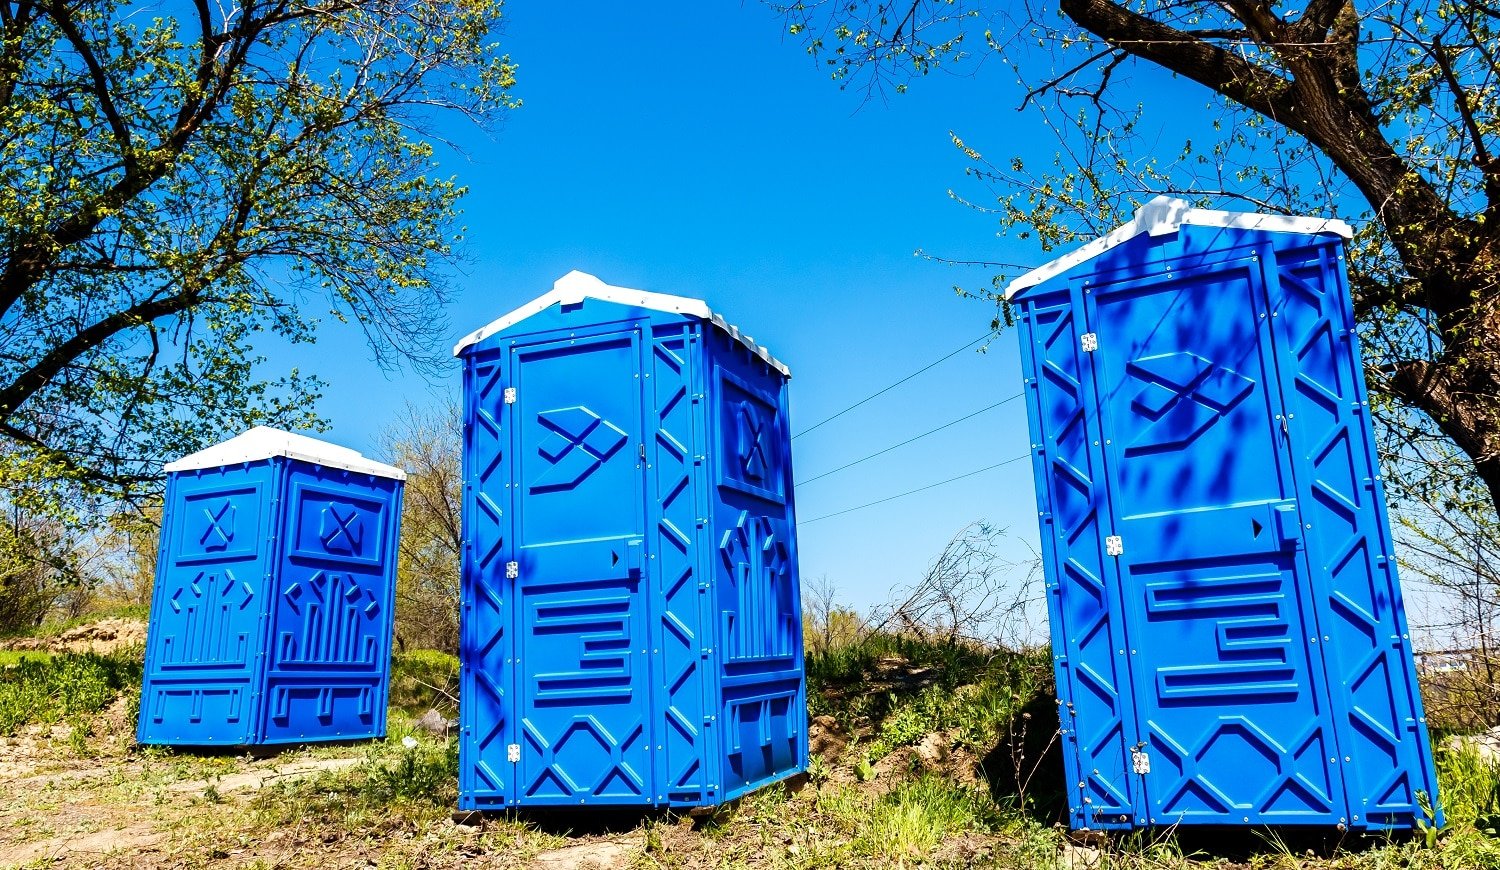 Three Blue Cabines Of Chemical Toilets In a Park at sunny Summer Day.